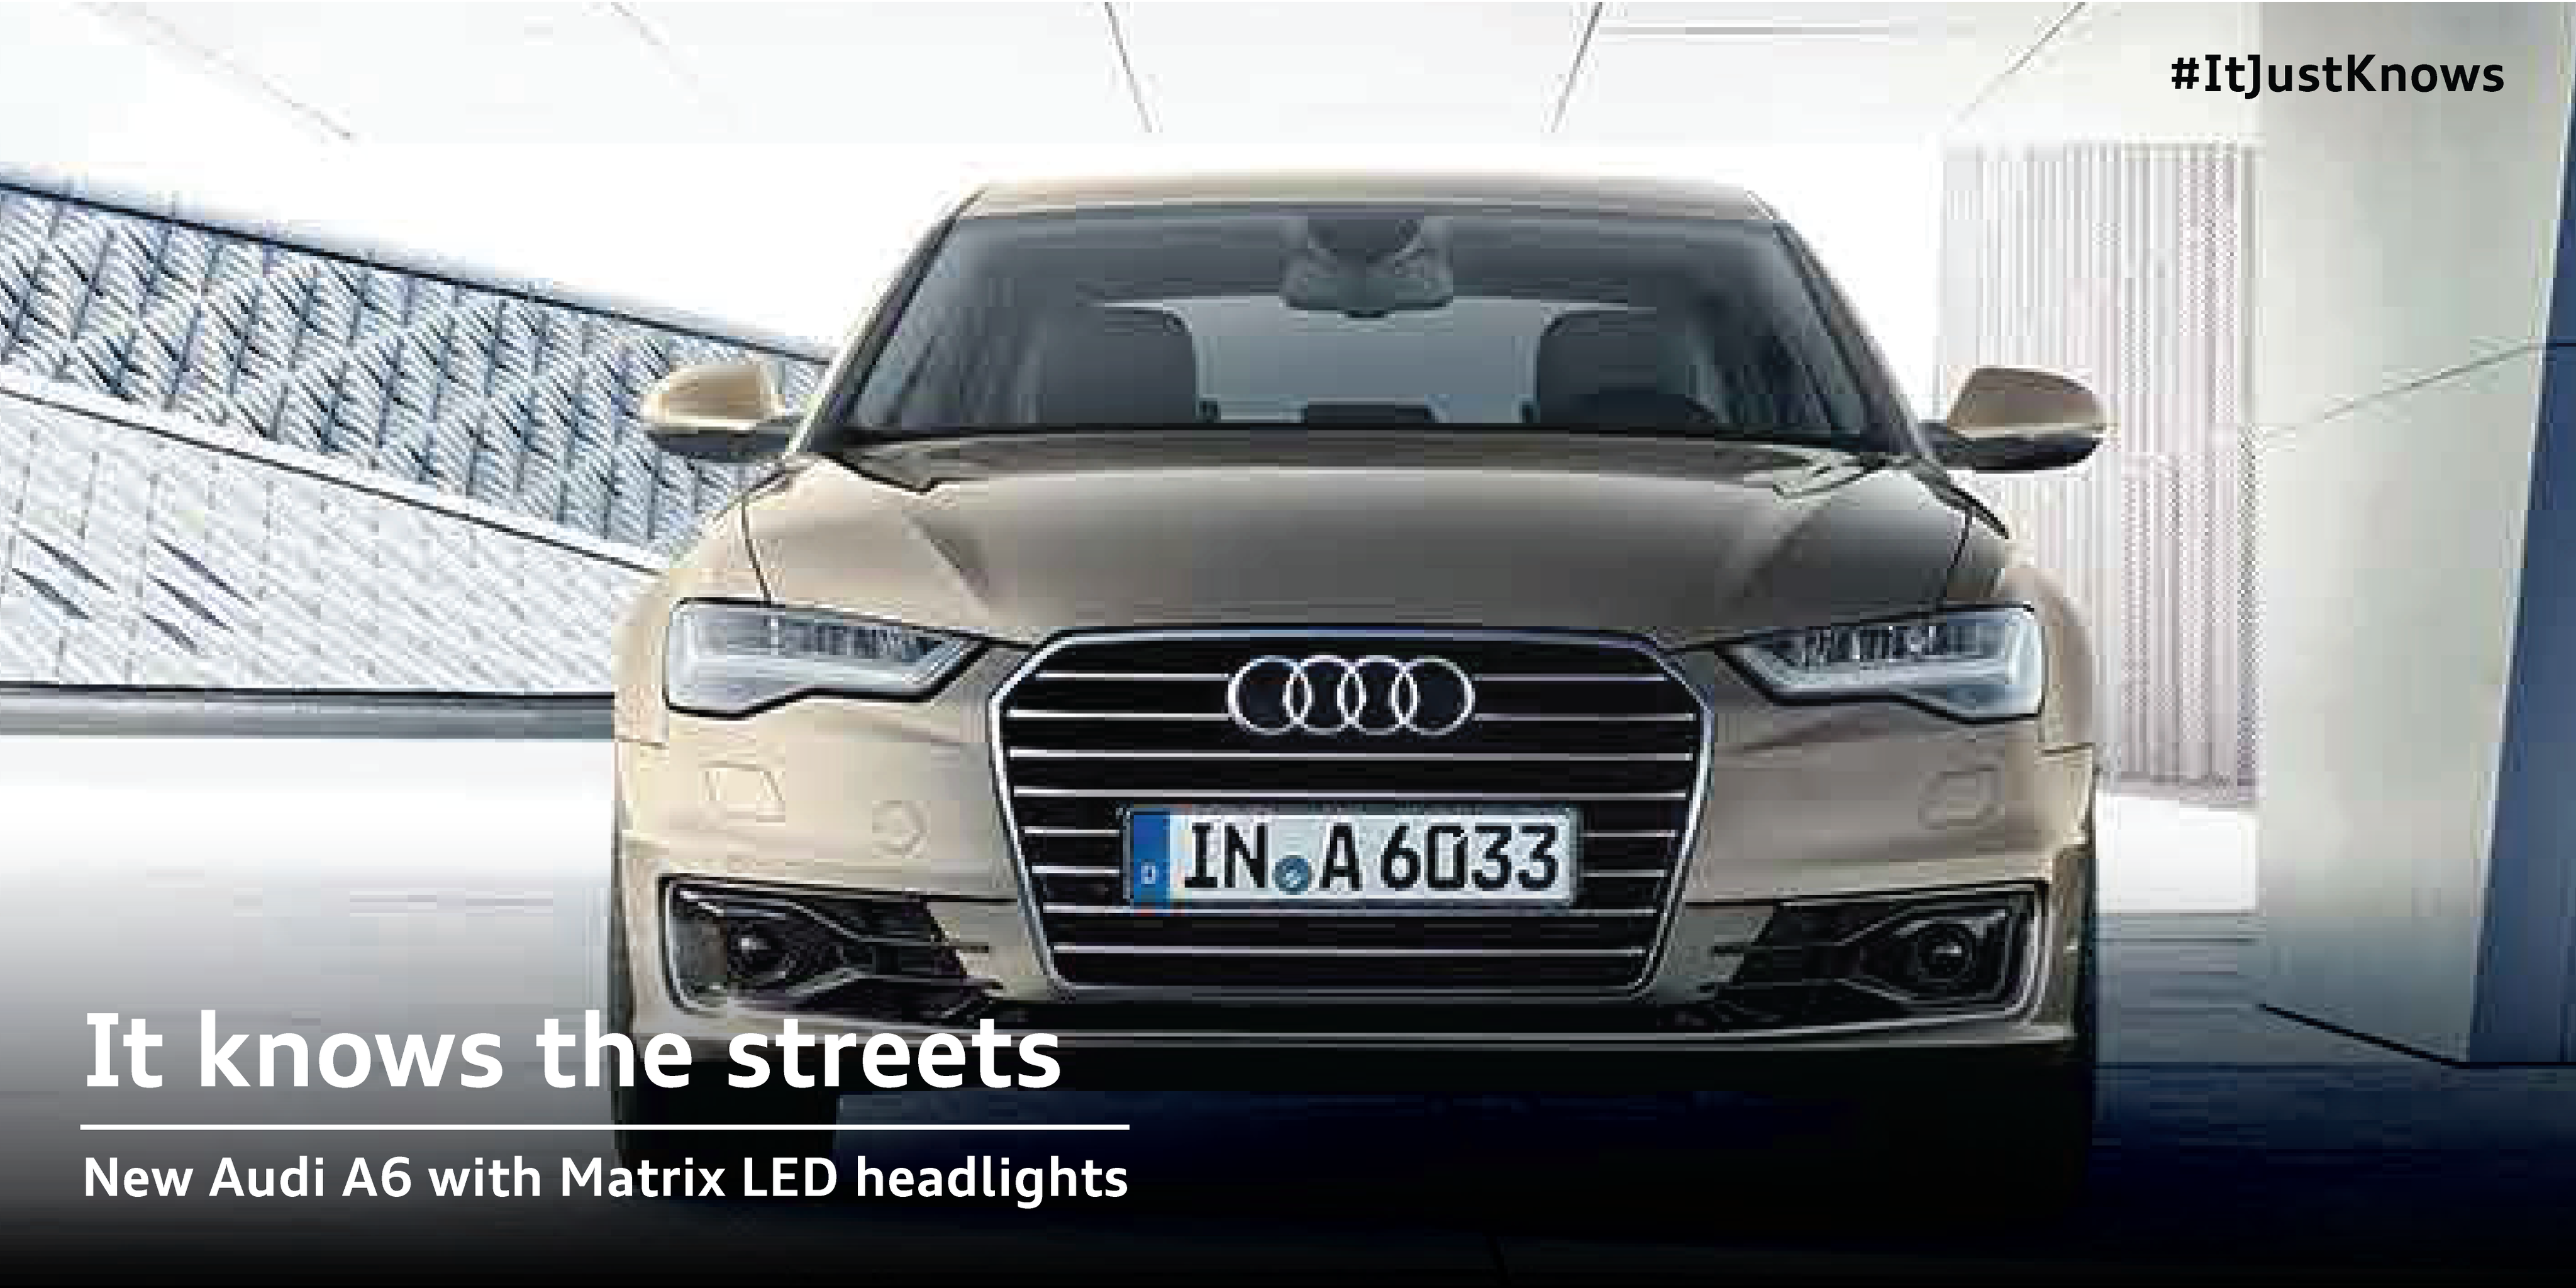 Audi India on Twitter: "The intelligent Matrix LED headlights in the new Audi A6 show you the road the way you need see it. #ItJustKnows http://t.co/A4cMJvzaAK" / Twitter